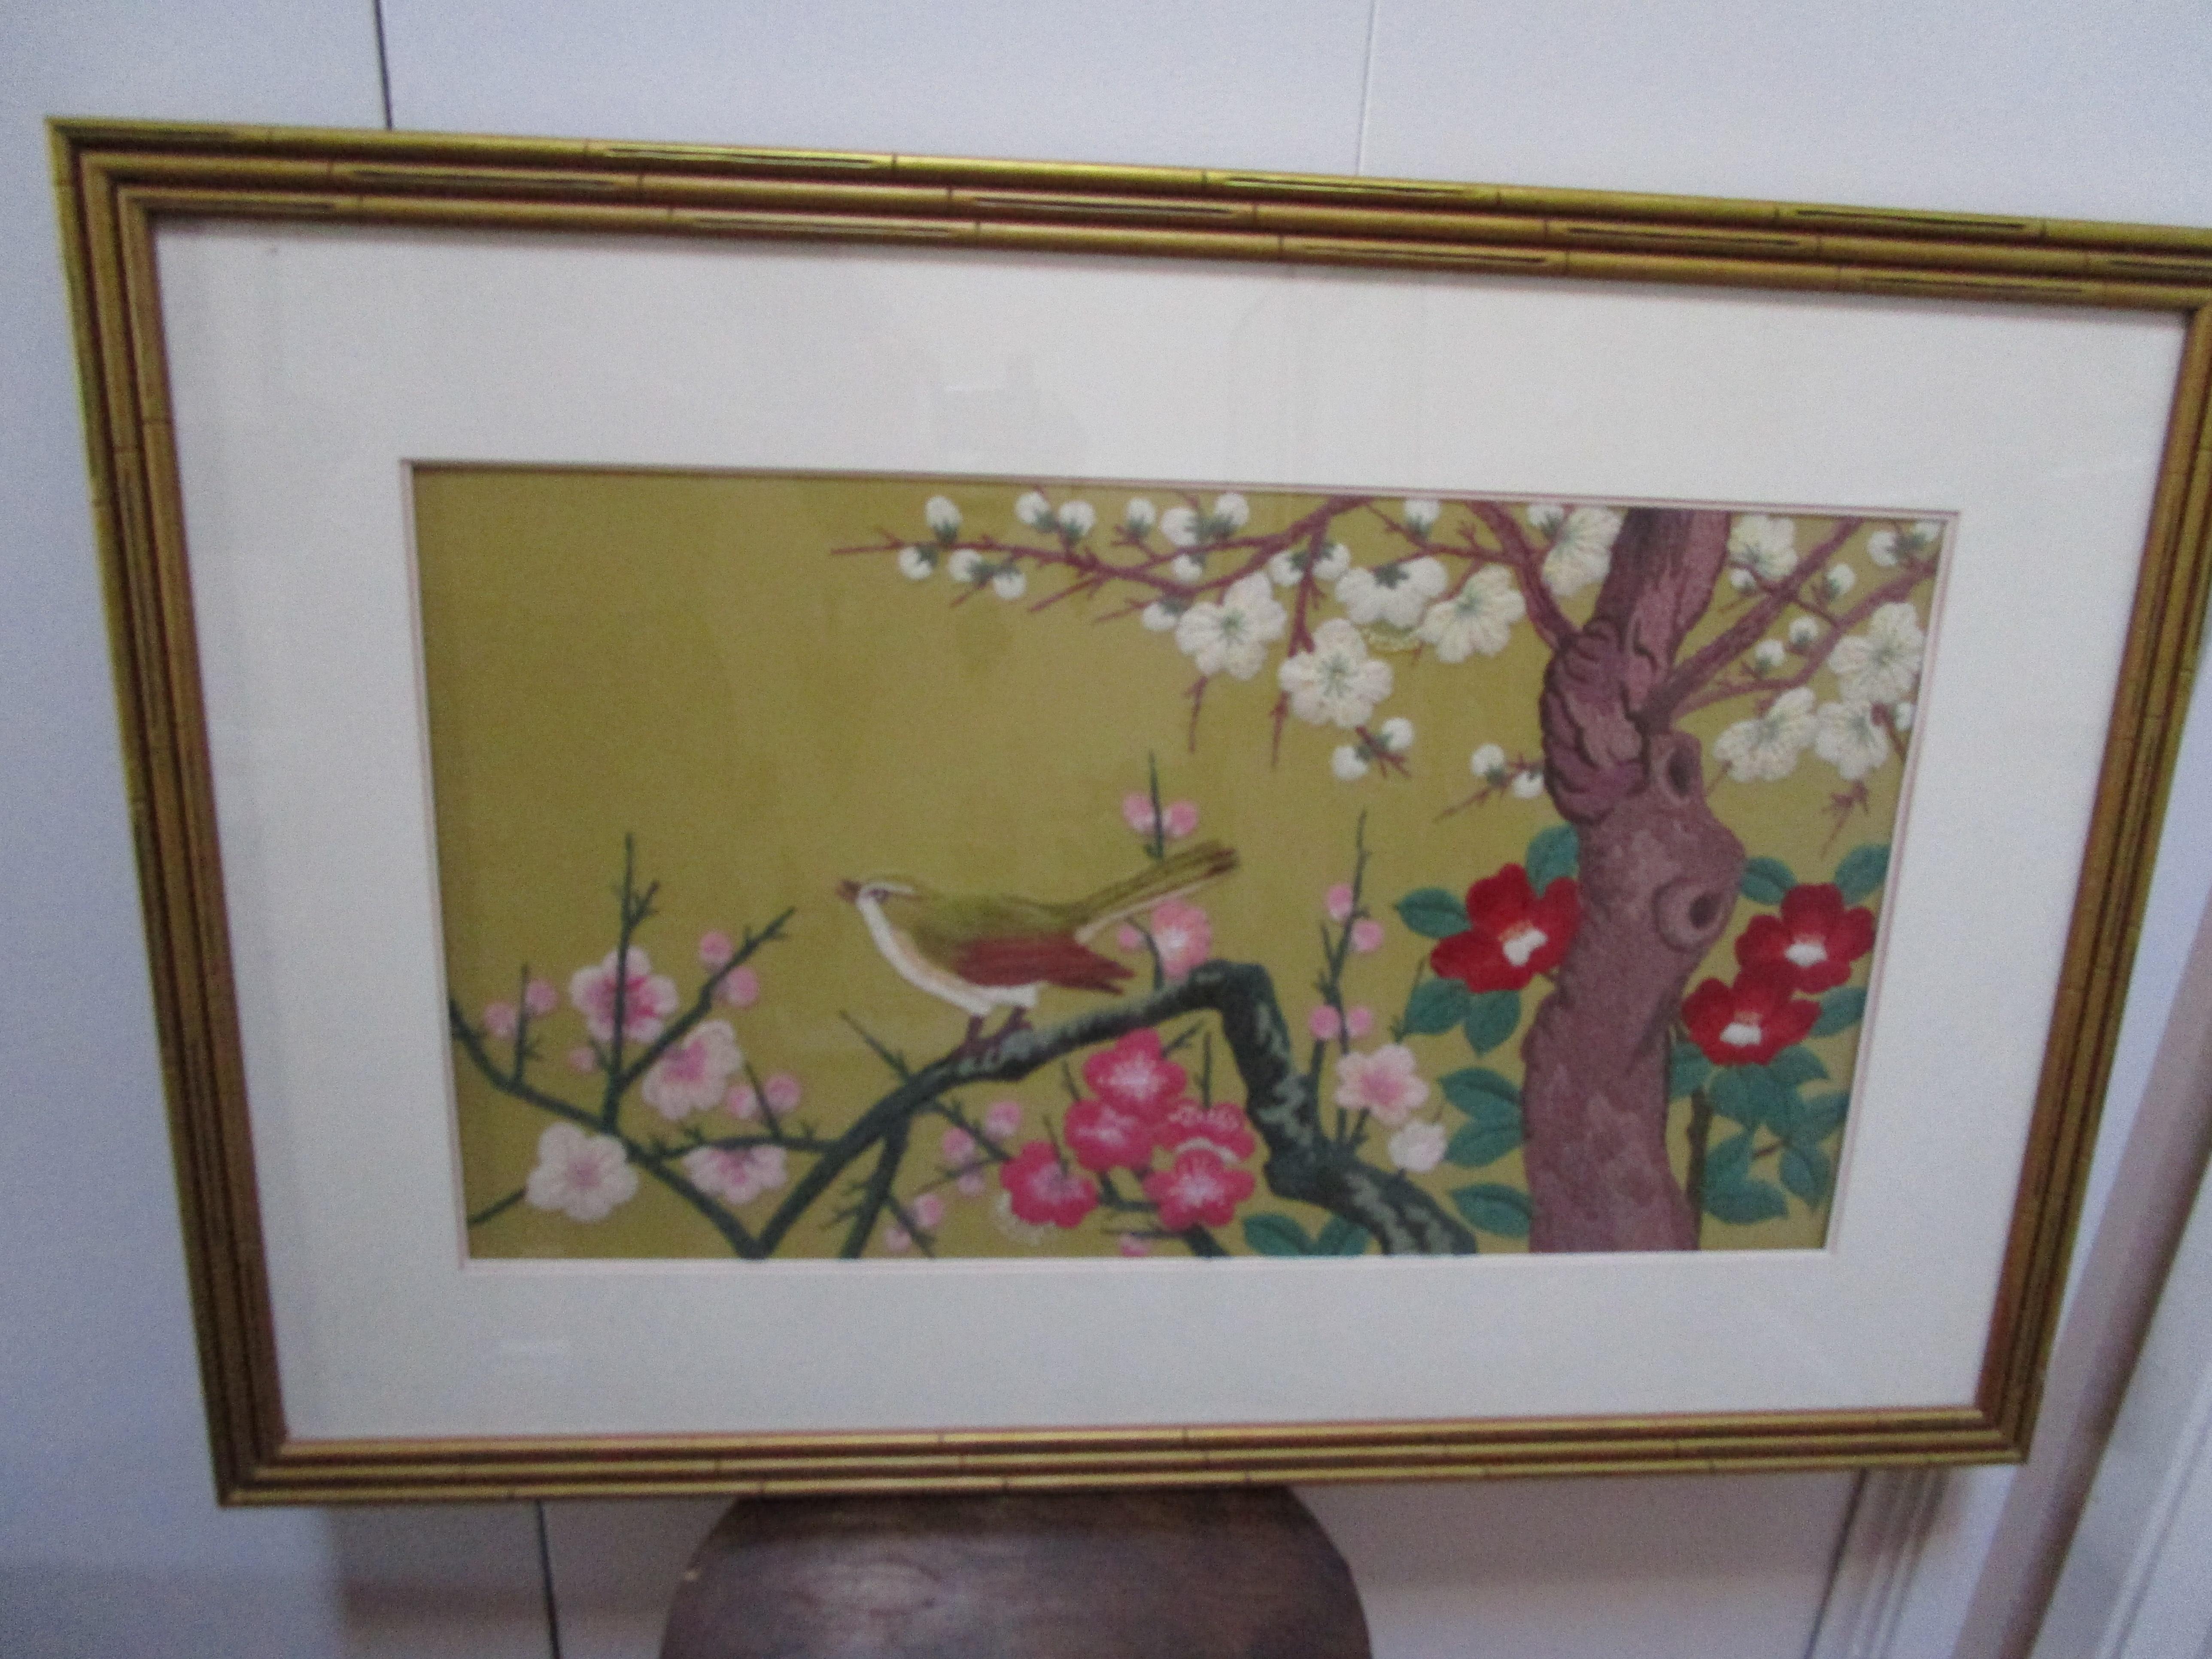 Silk 1940s Chinese Export Needlepoint with Nightingale on Branch with Blooms For Sale 1